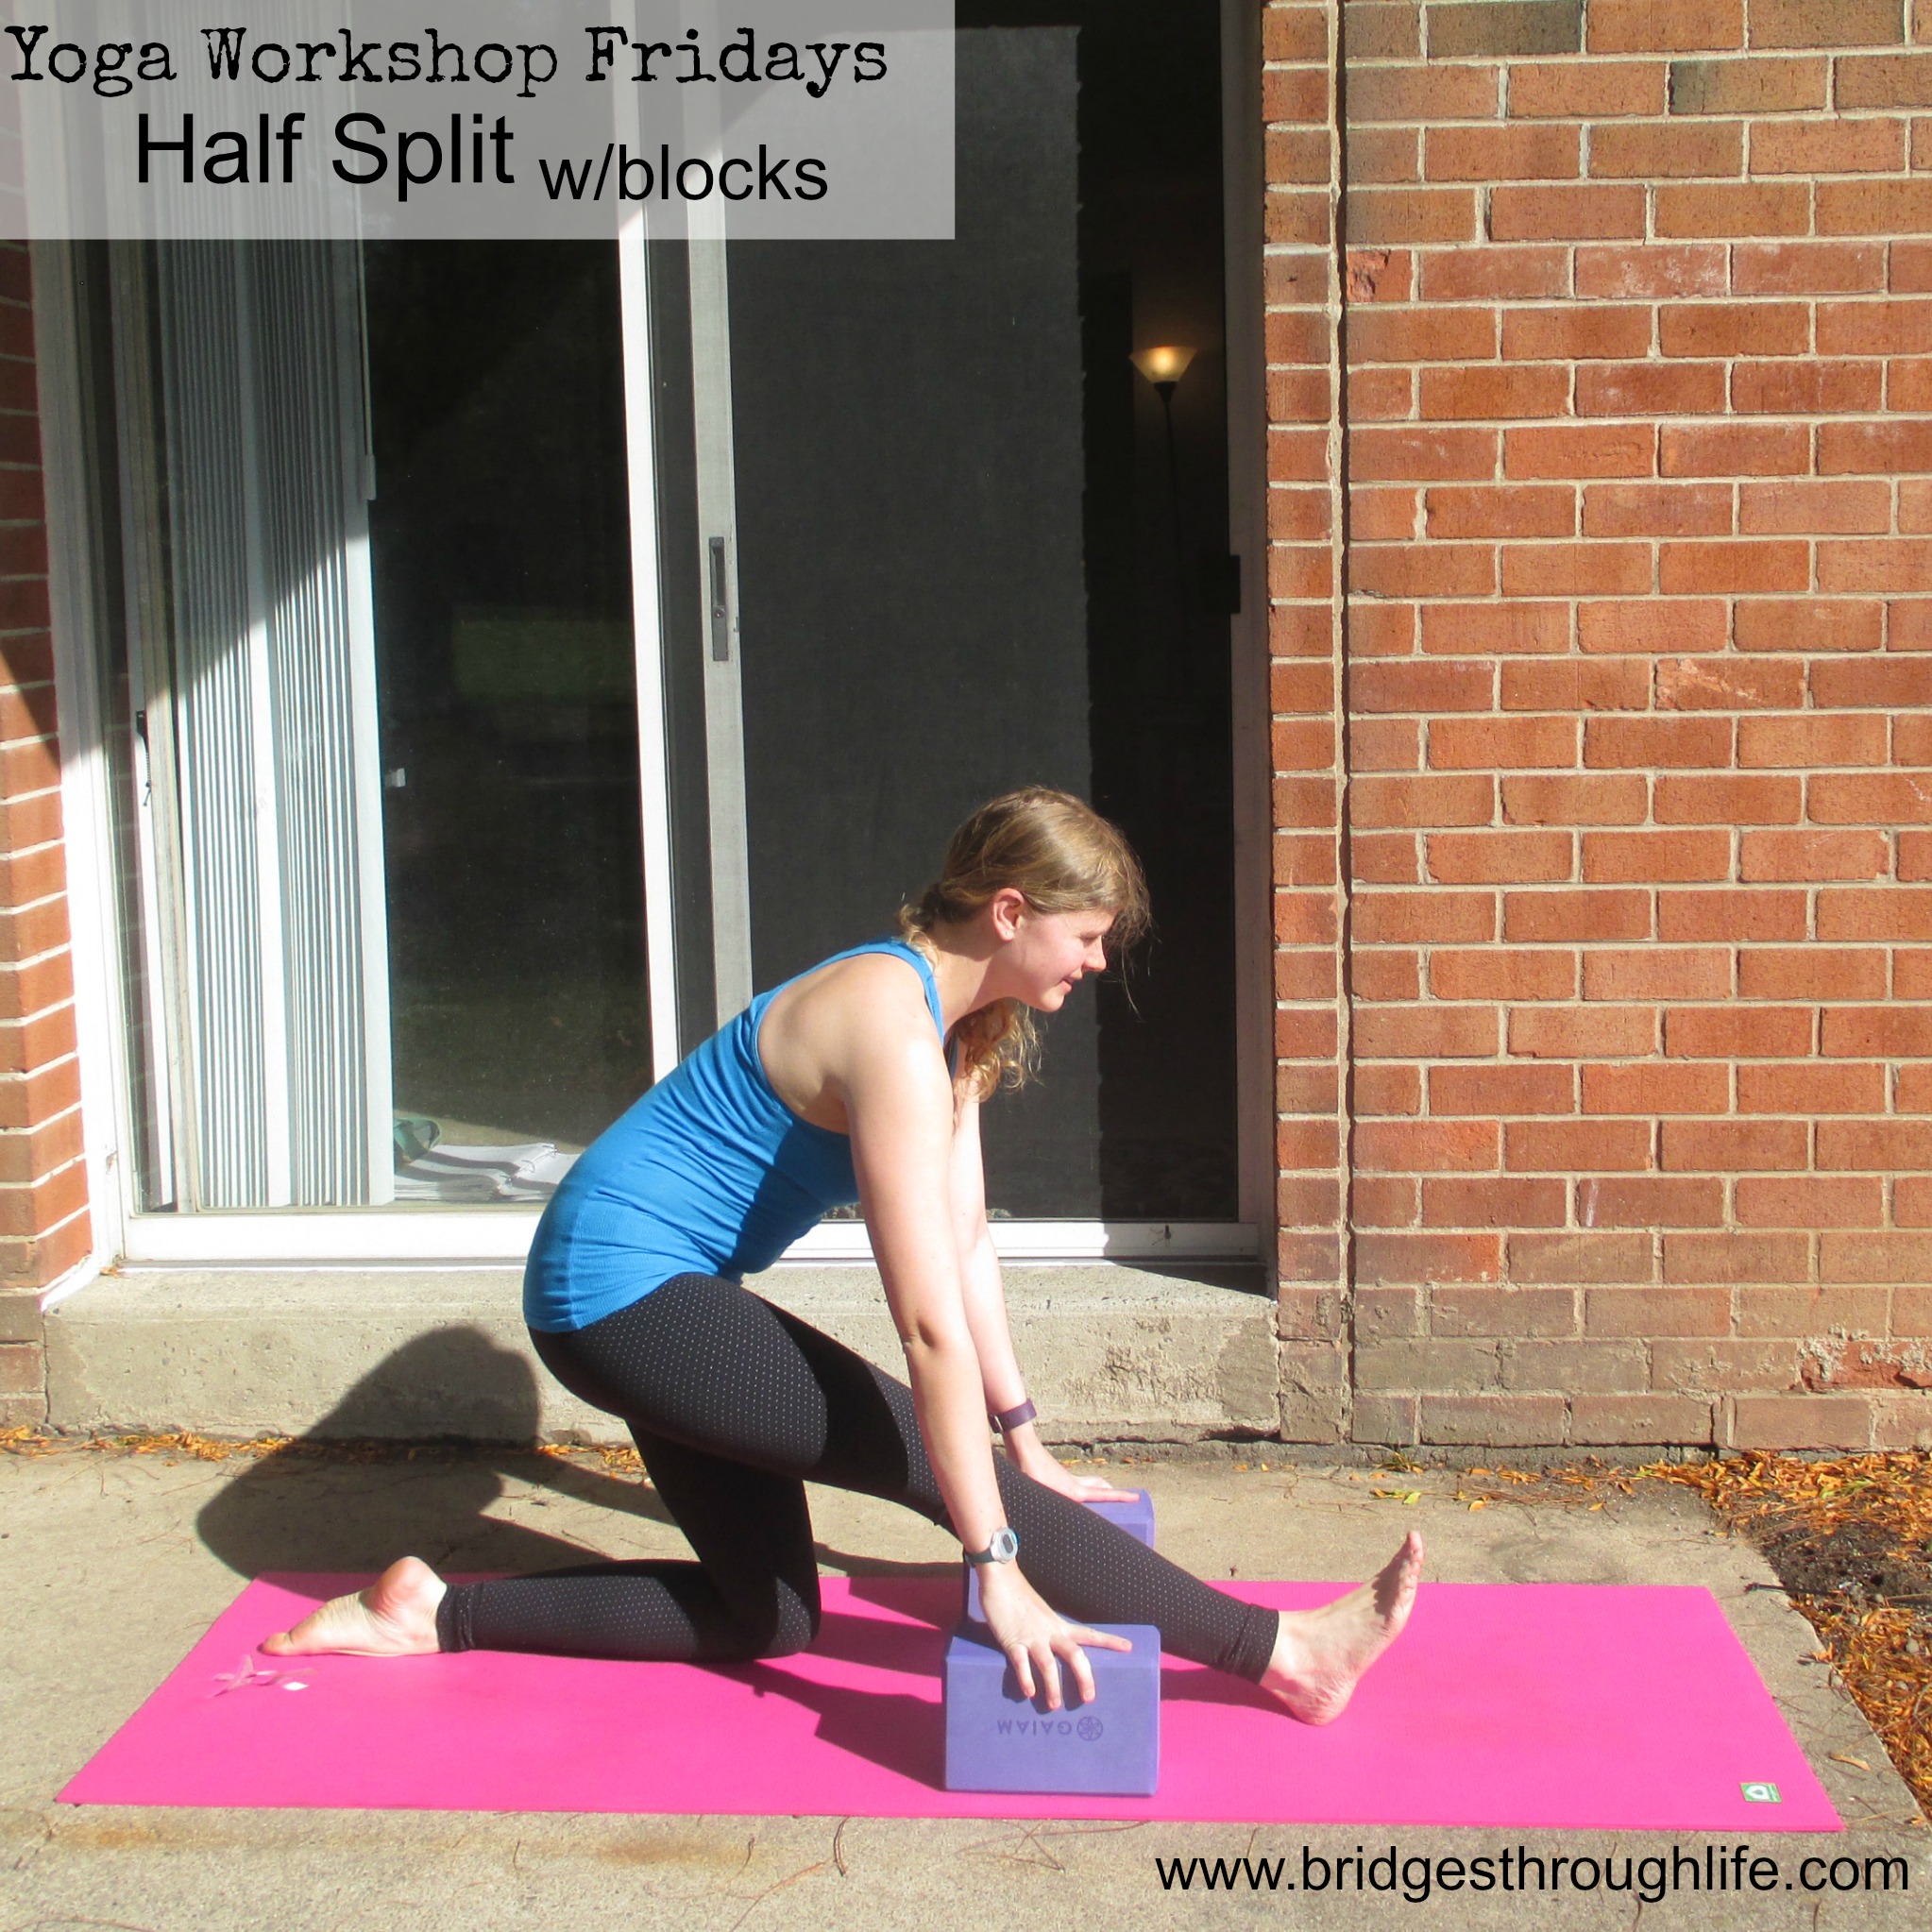 Yoga Poses for Everyday (@yogaposesfor) / X